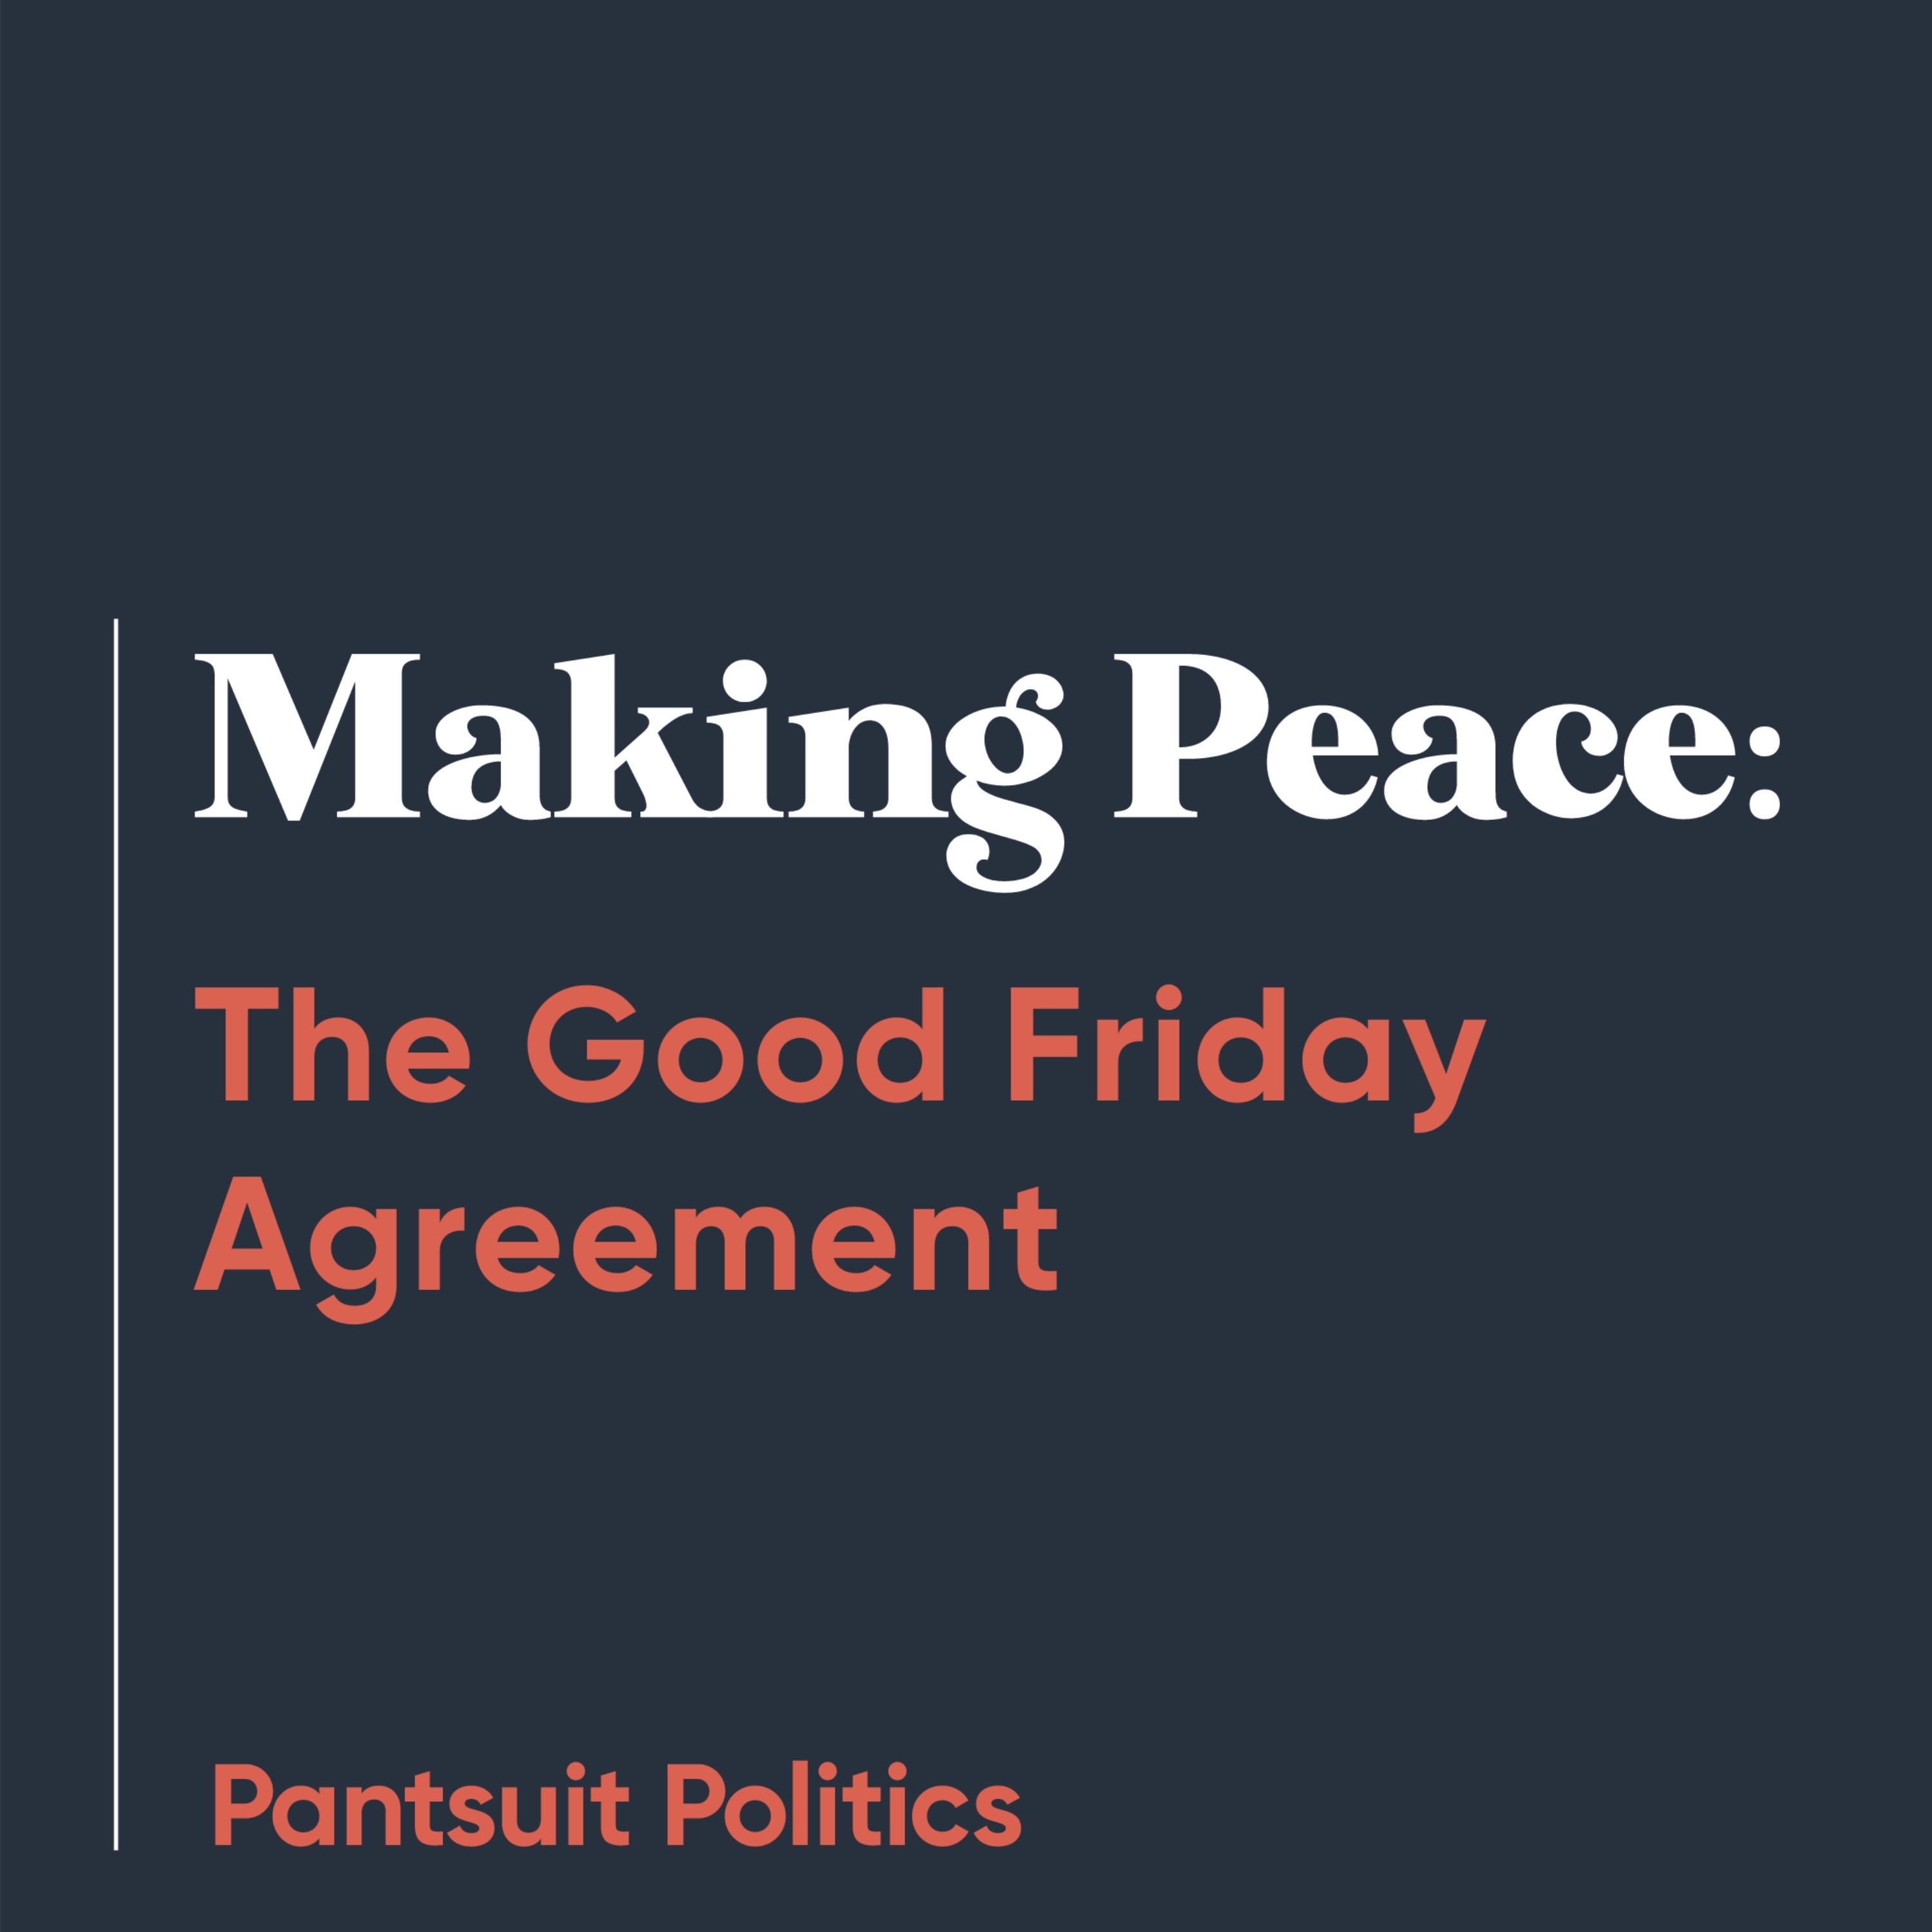 Making Peace: The Good Friday Agreement